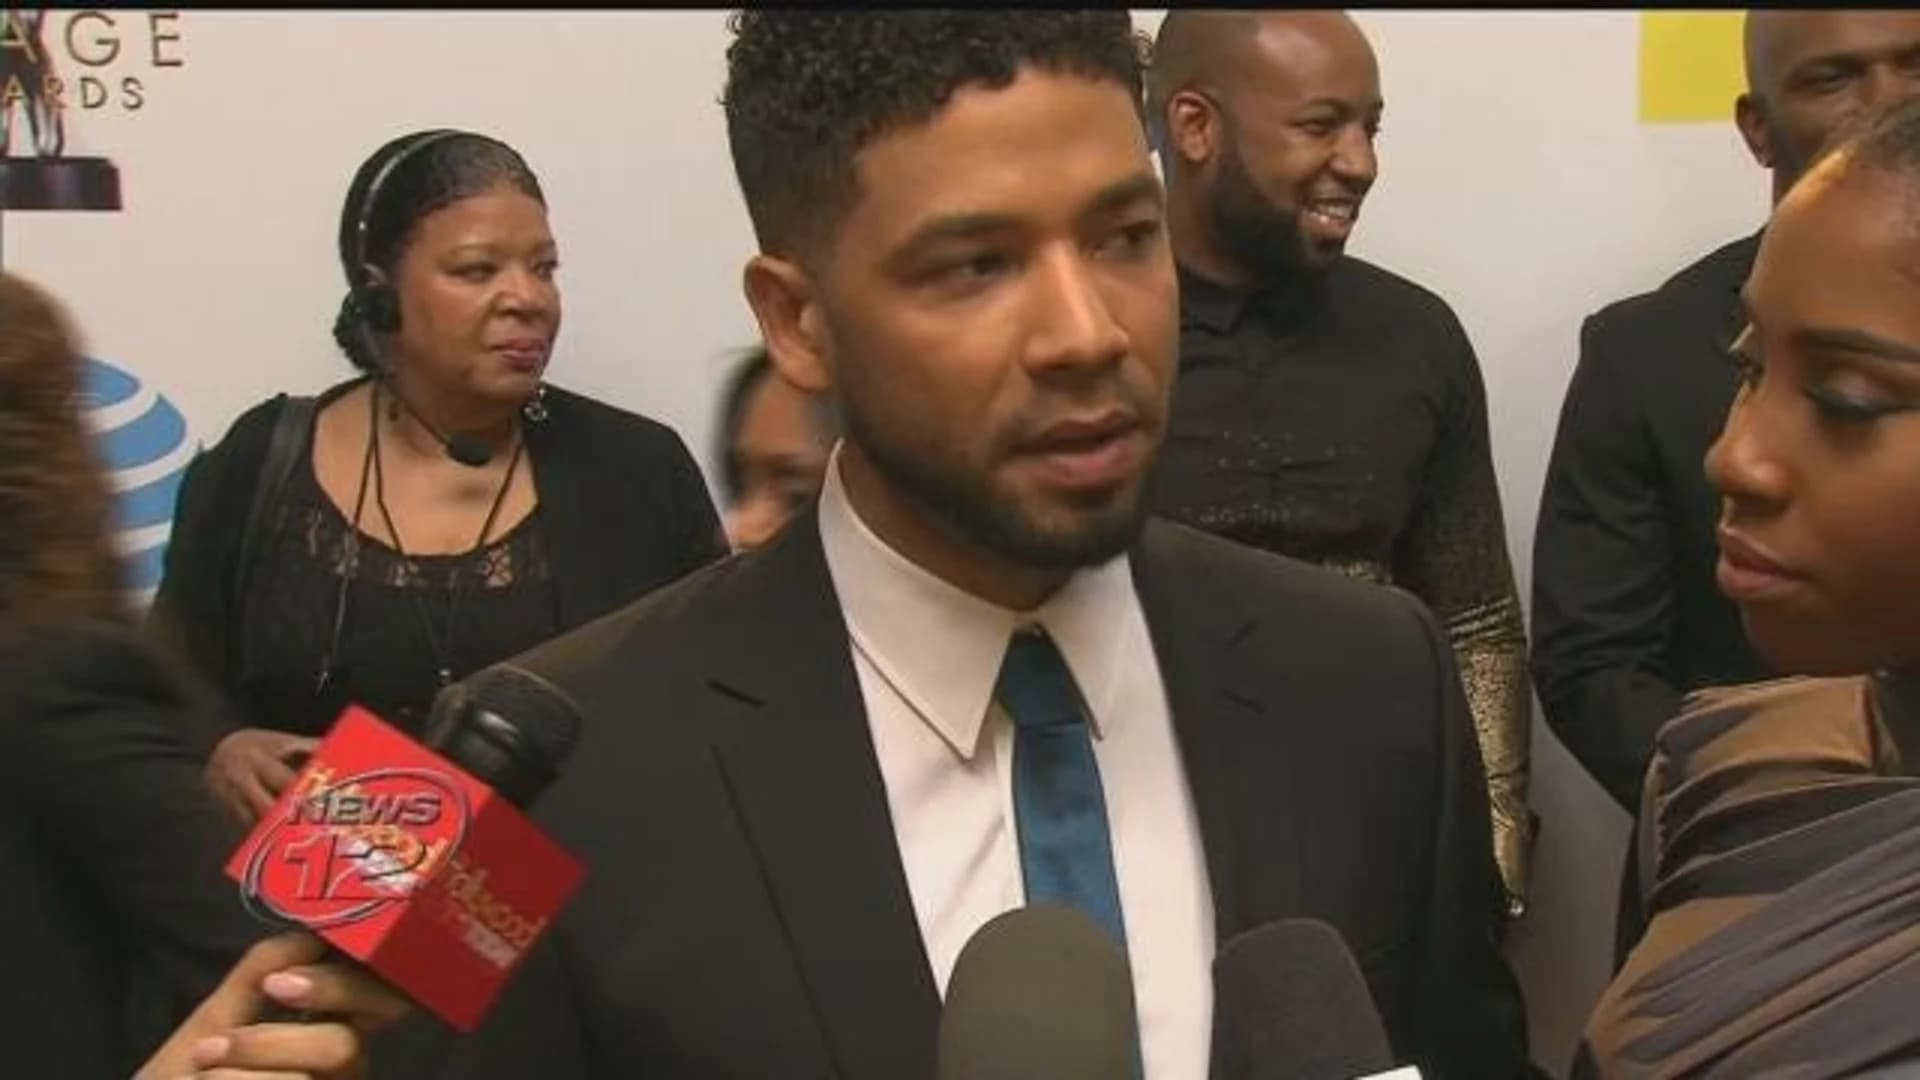 'Empire' actor charged with making false police report